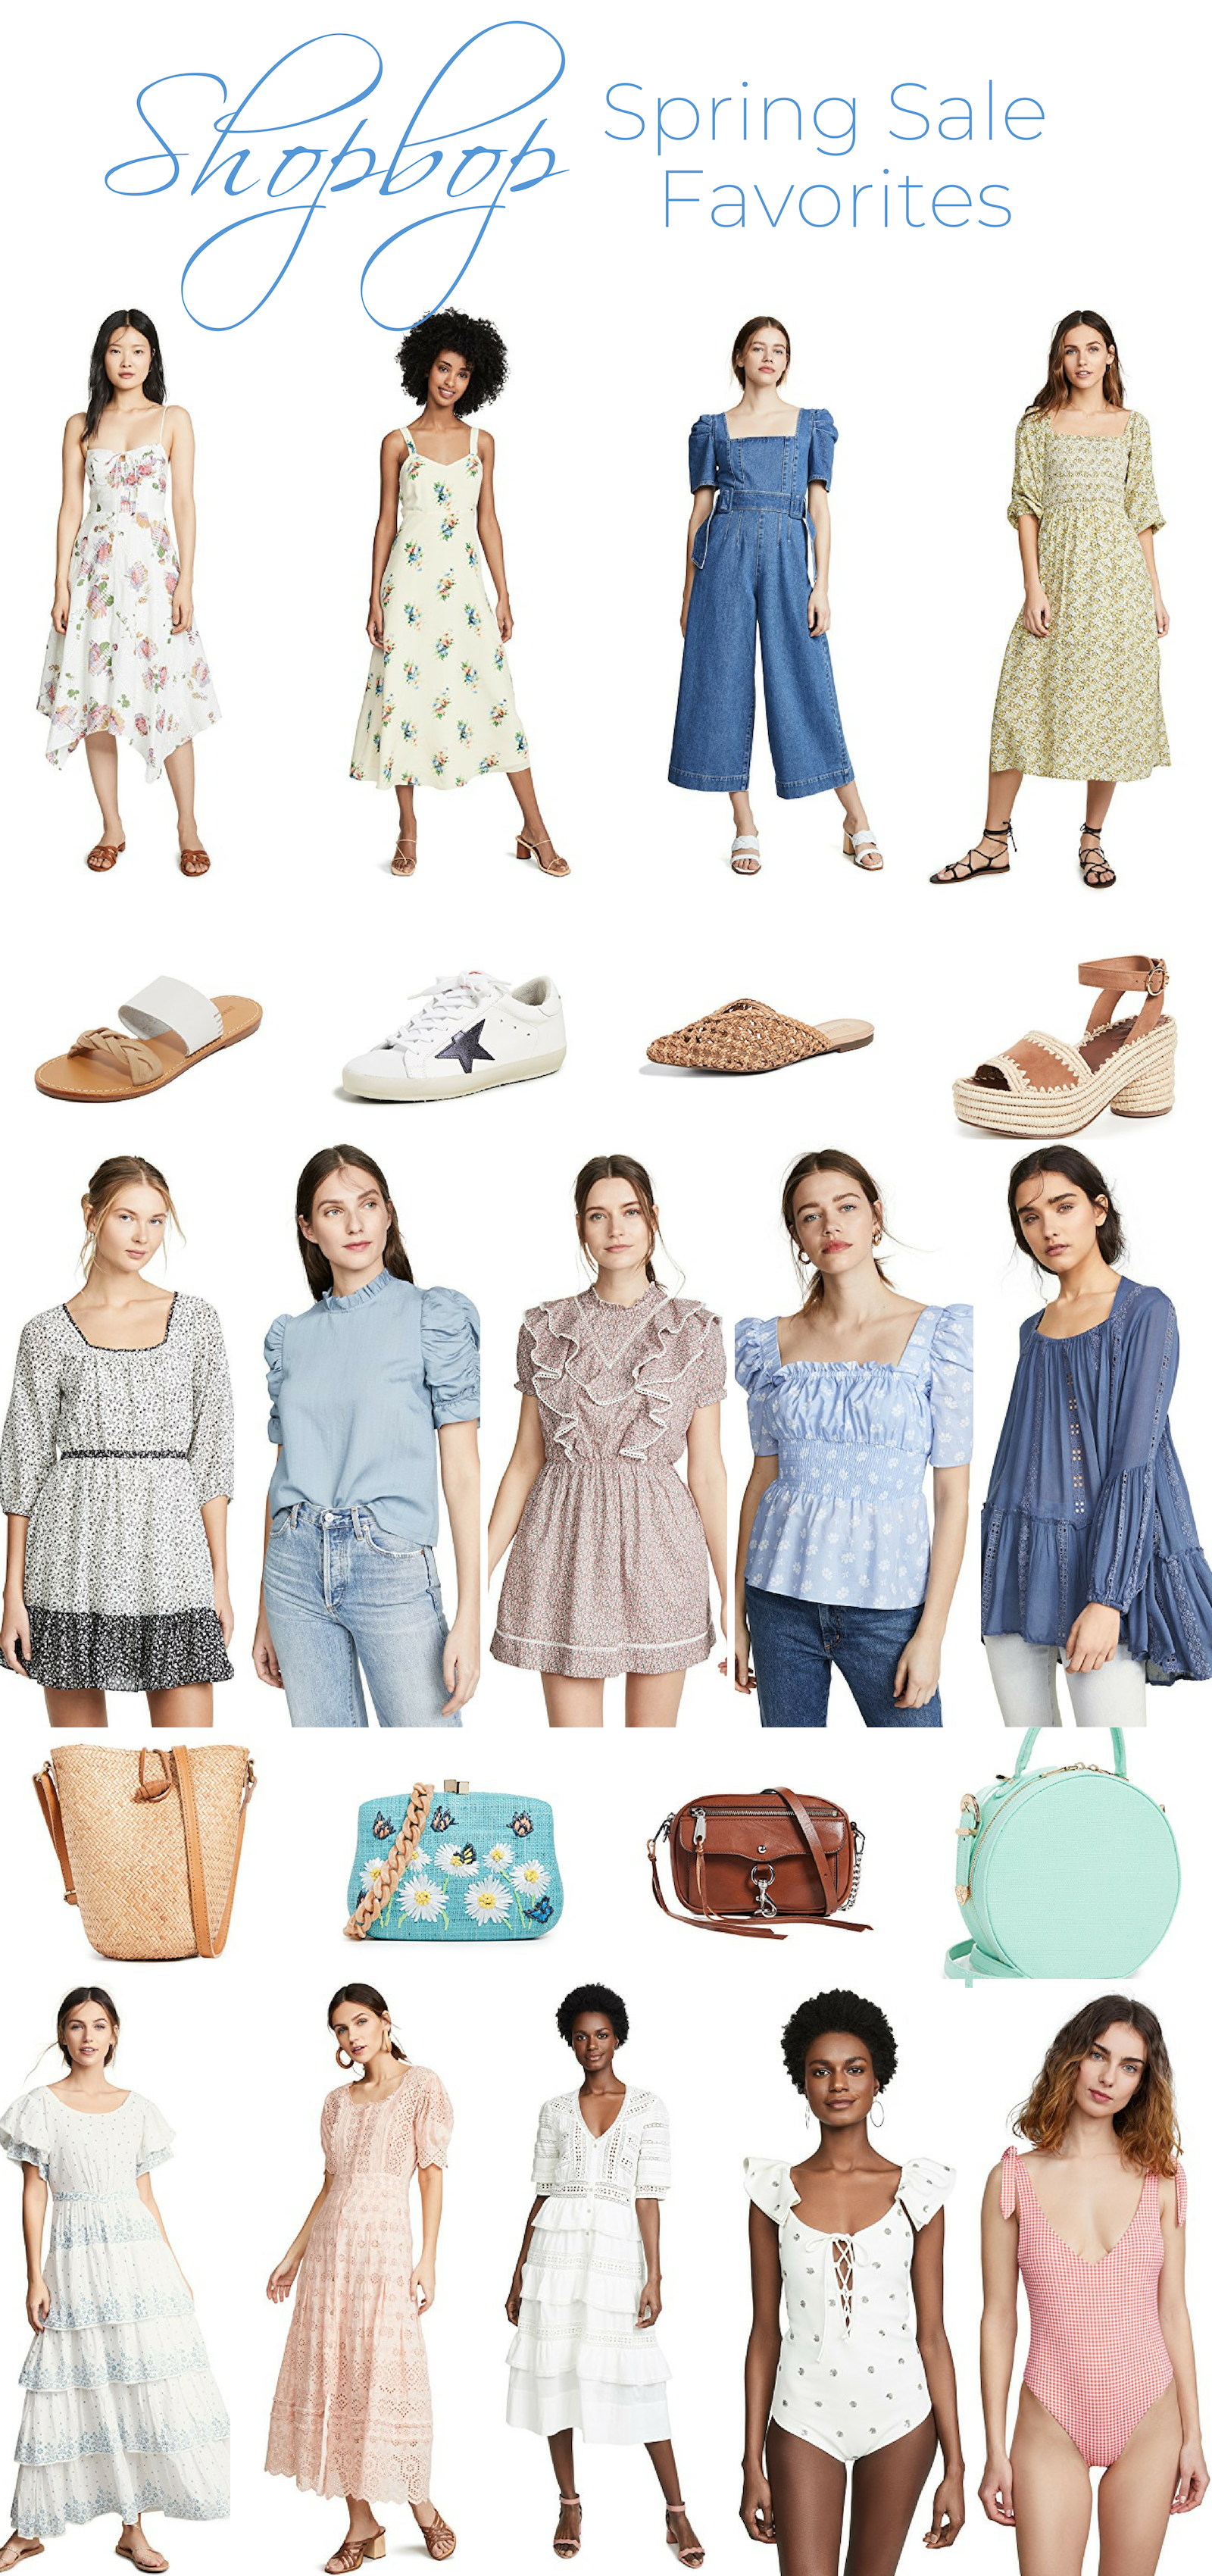 The Best Finds from the Shopbop Spring Sale | Lone Star Looking Glass